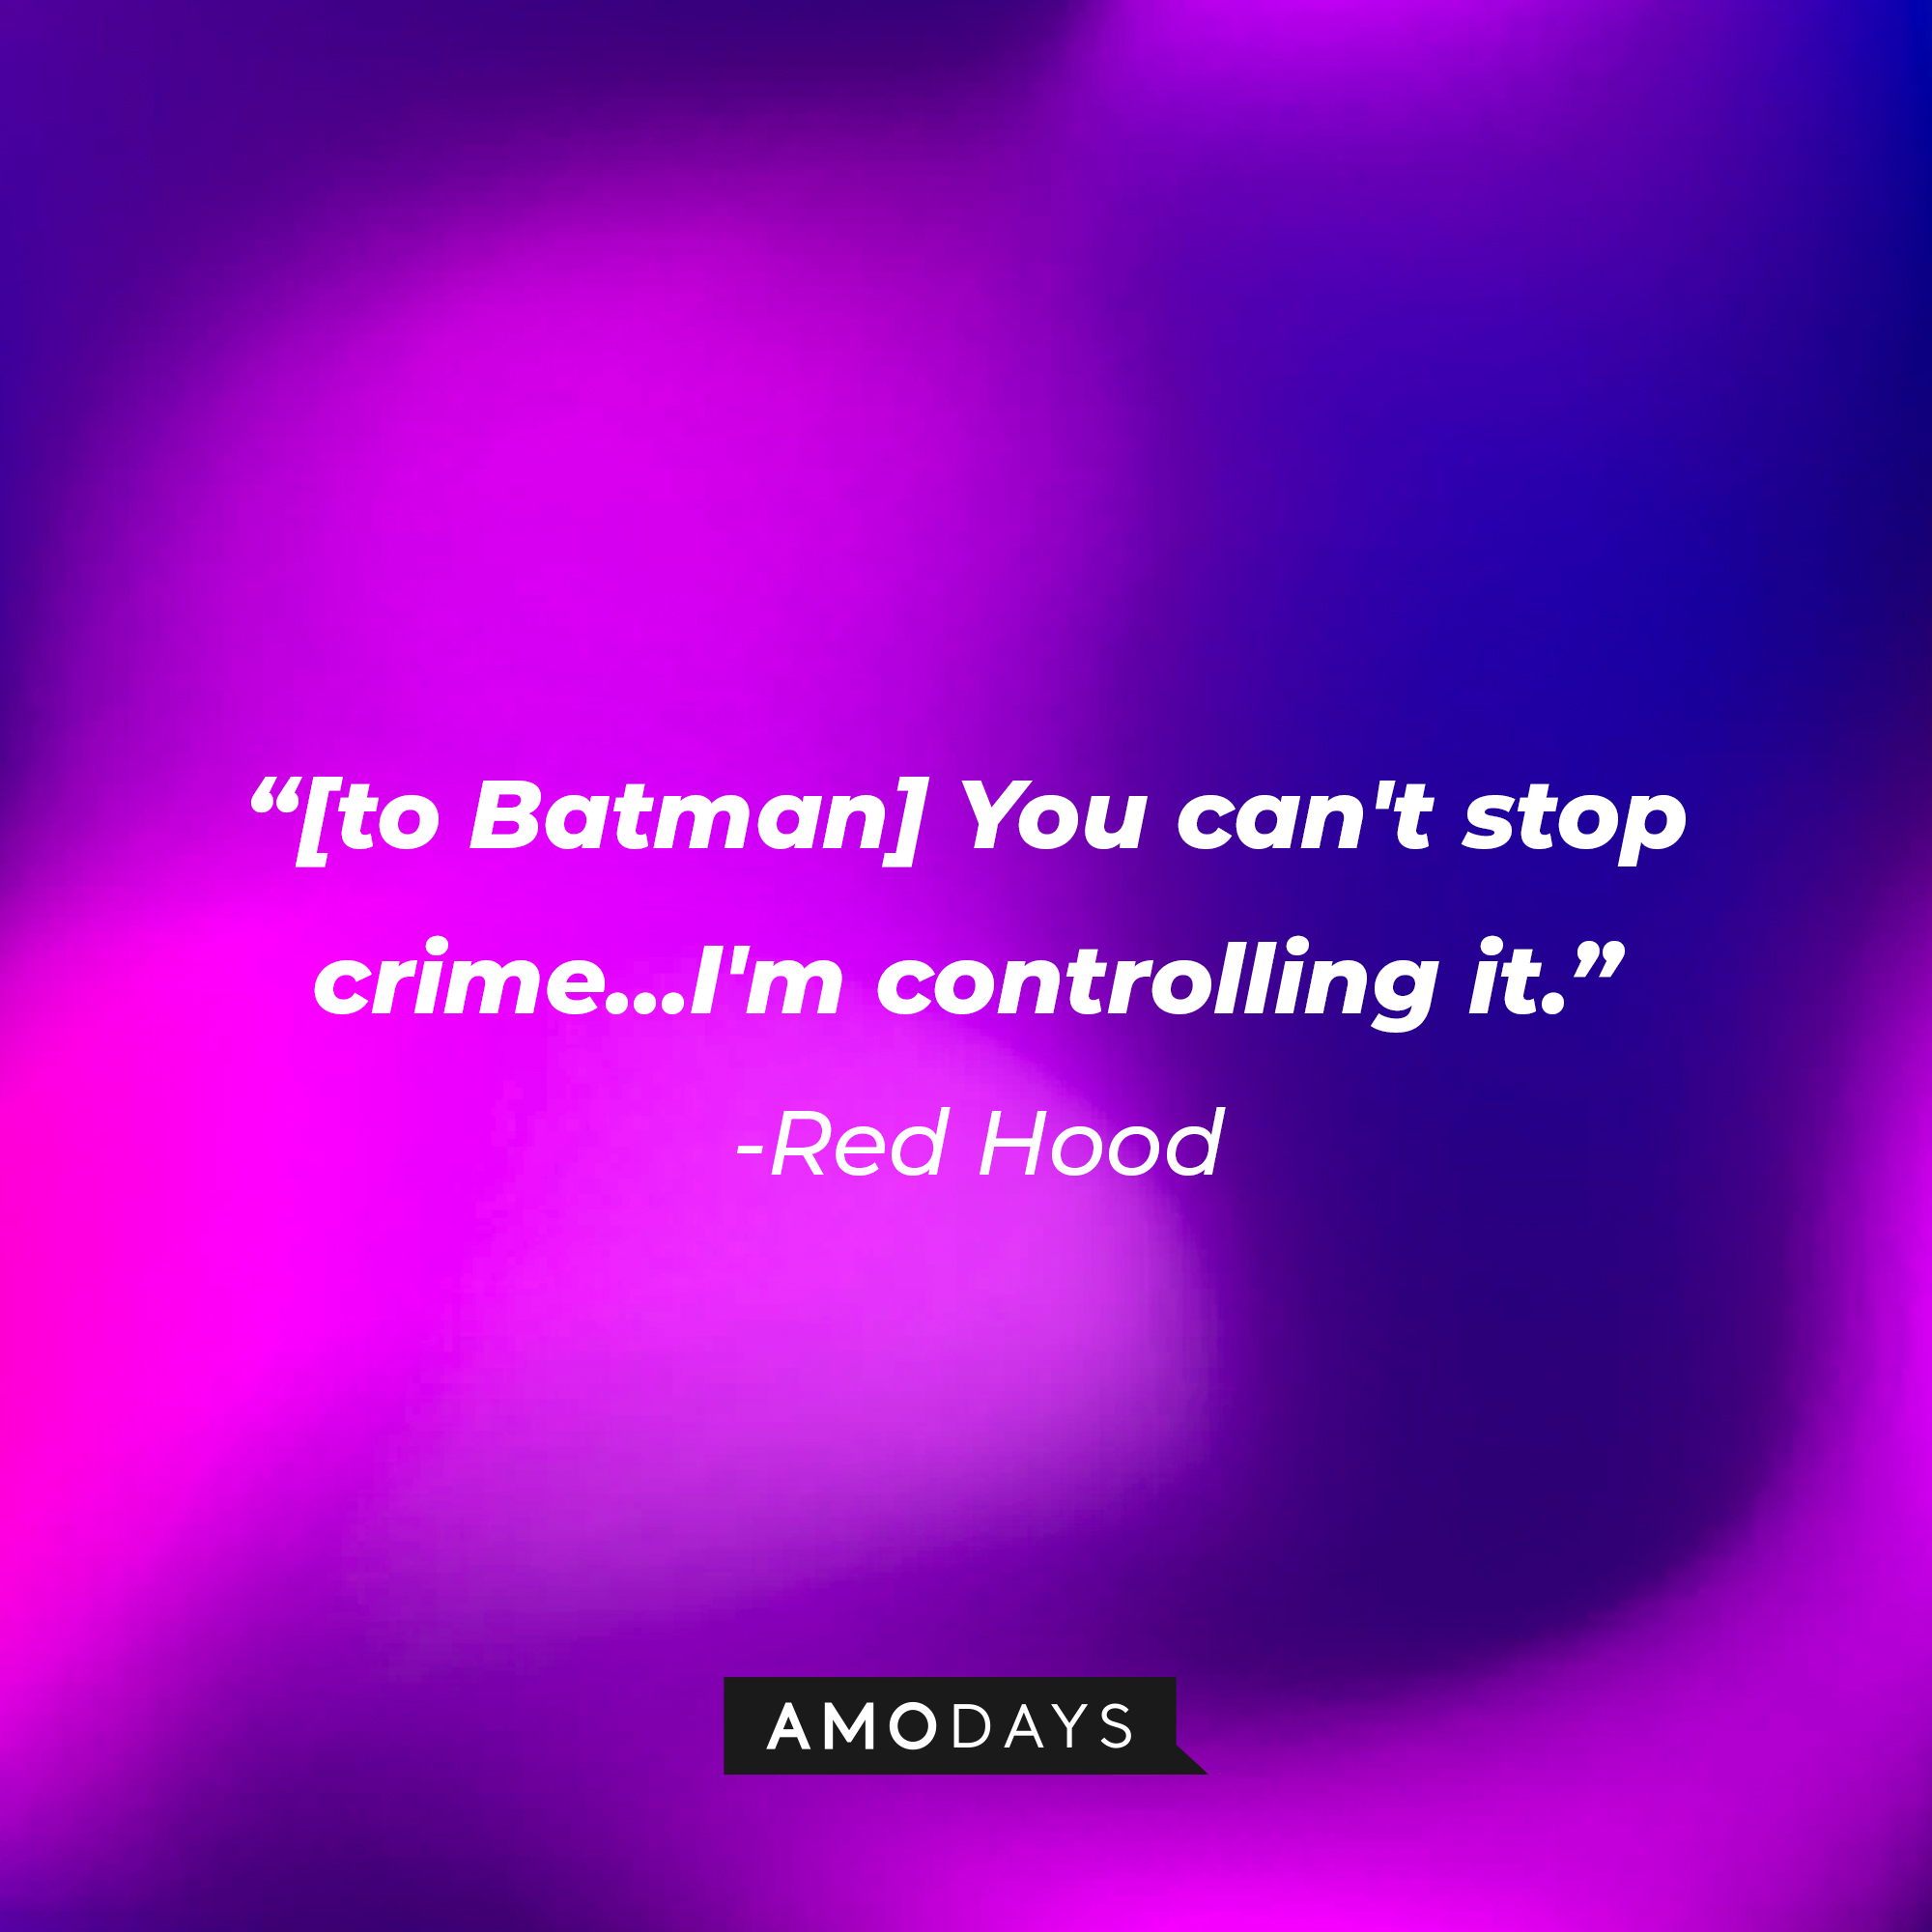 Red Hood’s quote: "[to Batman] You can't stop crime…I'm controlling it.” | Source: AmoDays